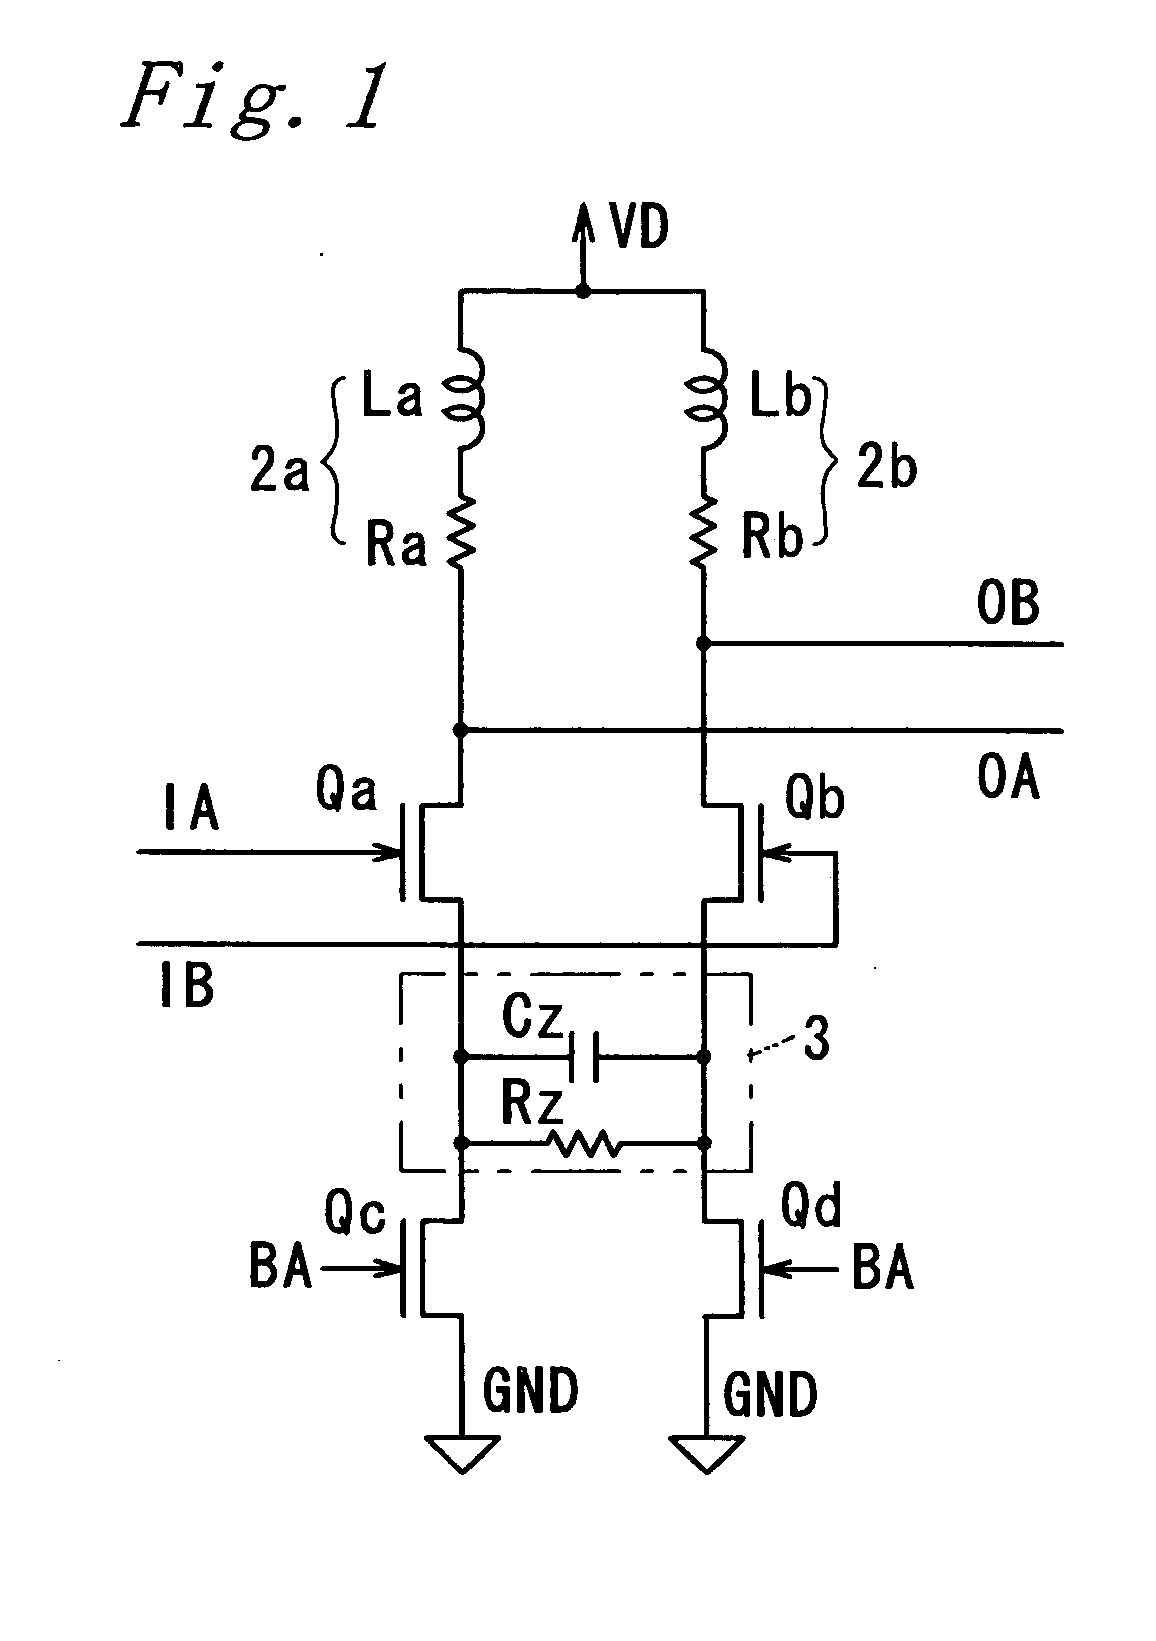 Differential amplifier circuit and multistage amplifier circuit